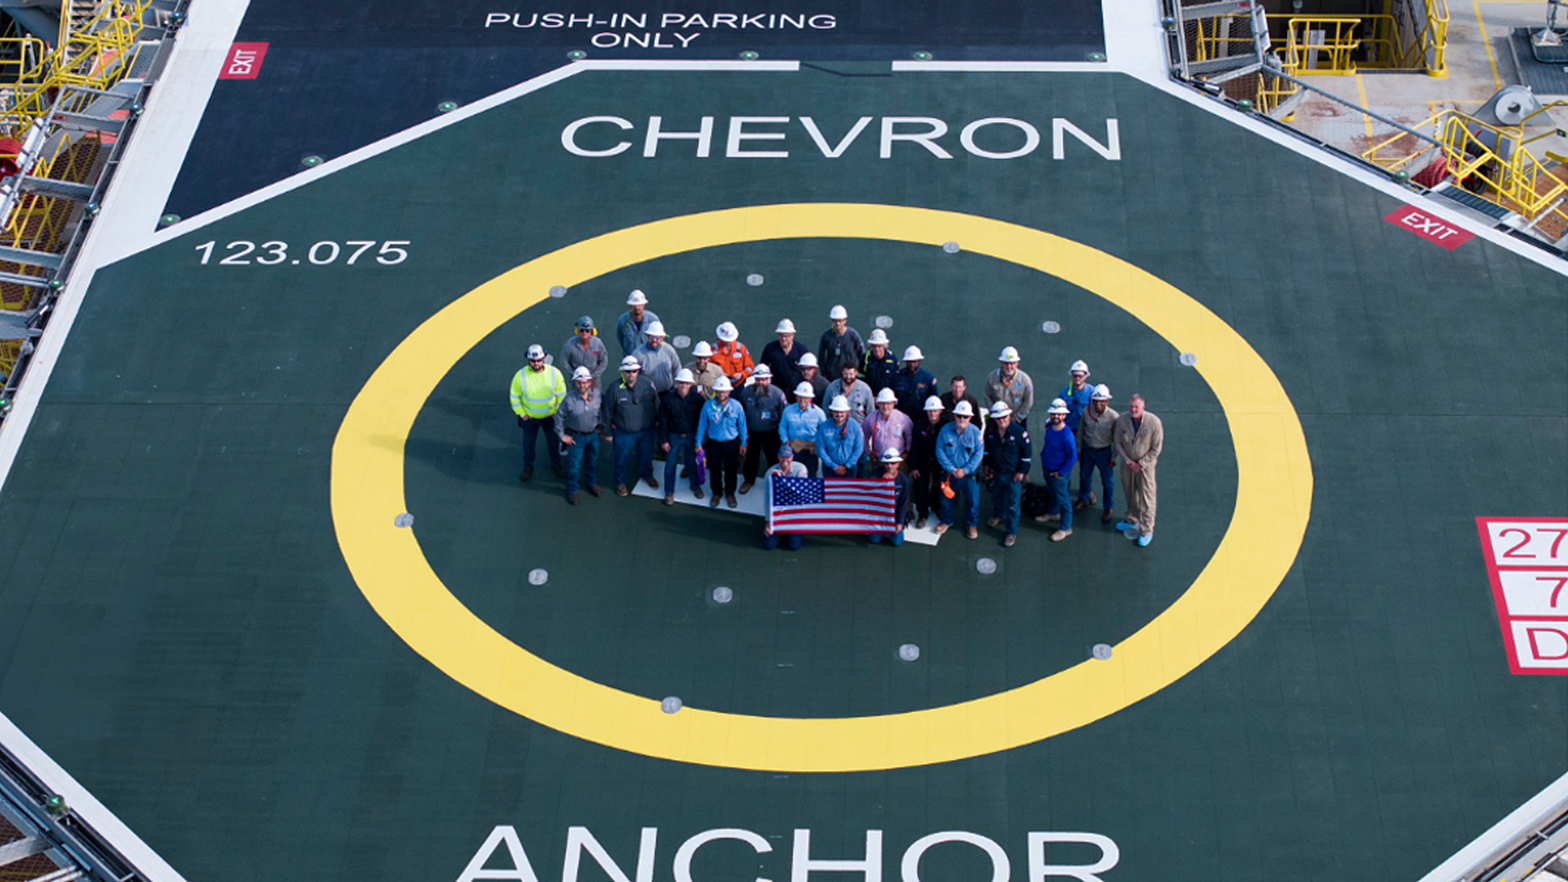 Project team members celebrating the sail away milestone on the Anchor helipad.